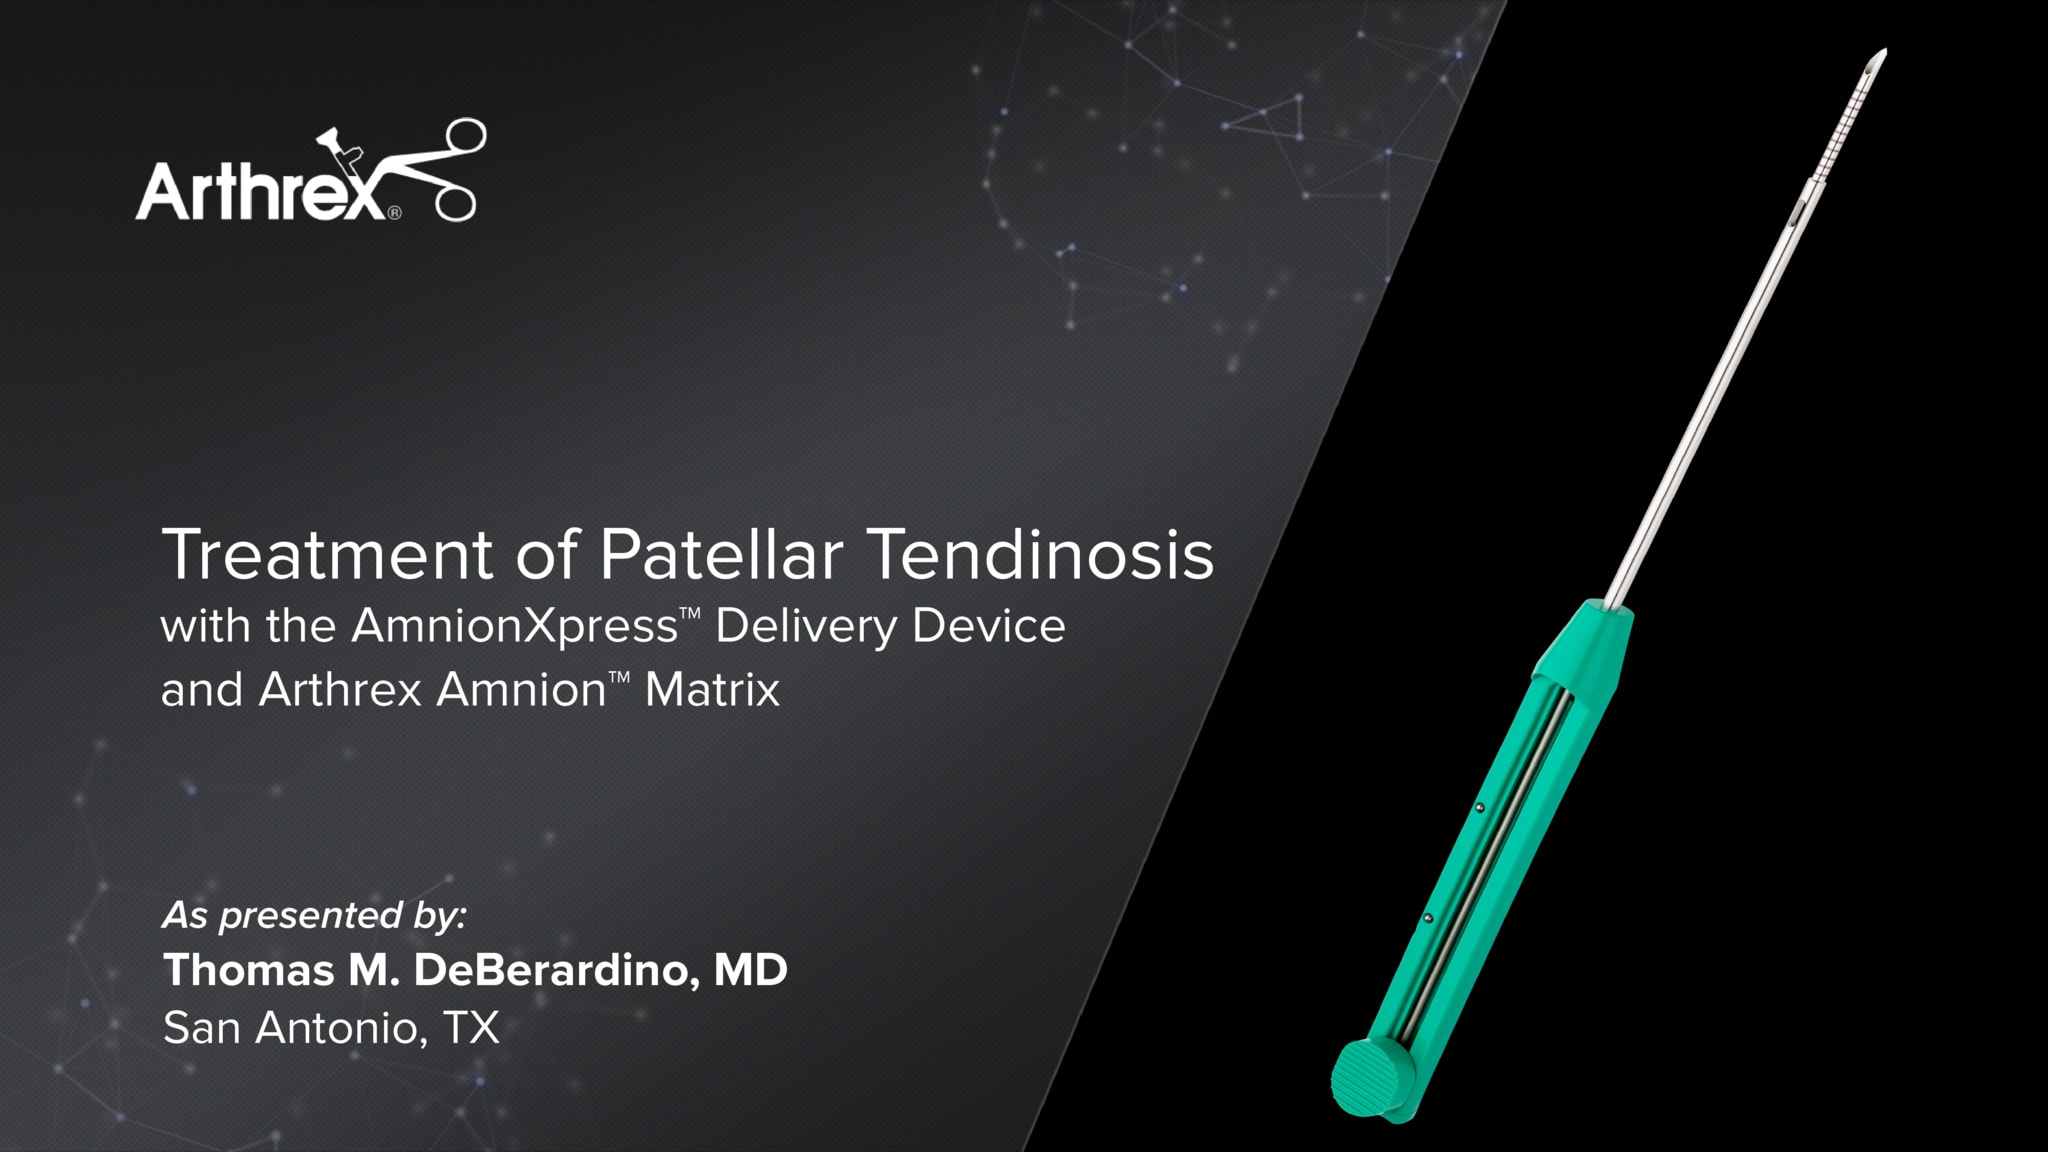 Treatment of Patellar Tendinosis With the AmnionXpress™ Delivery Device and Arthrex Amnion™ Matrix